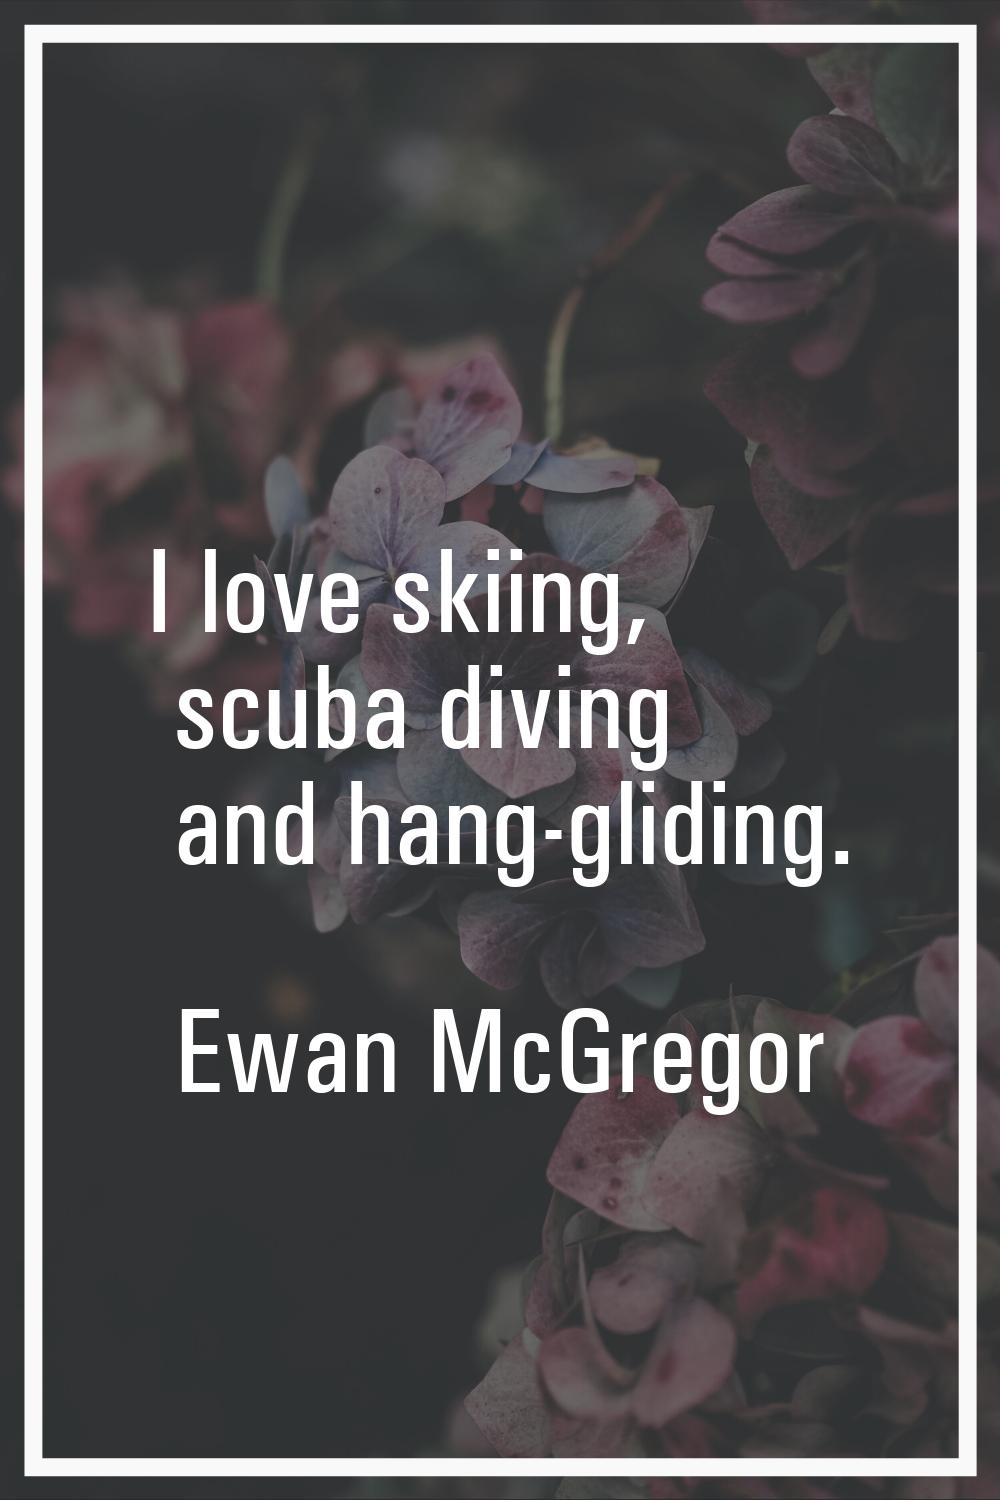 I love skiing, scuba diving and hang-gliding.